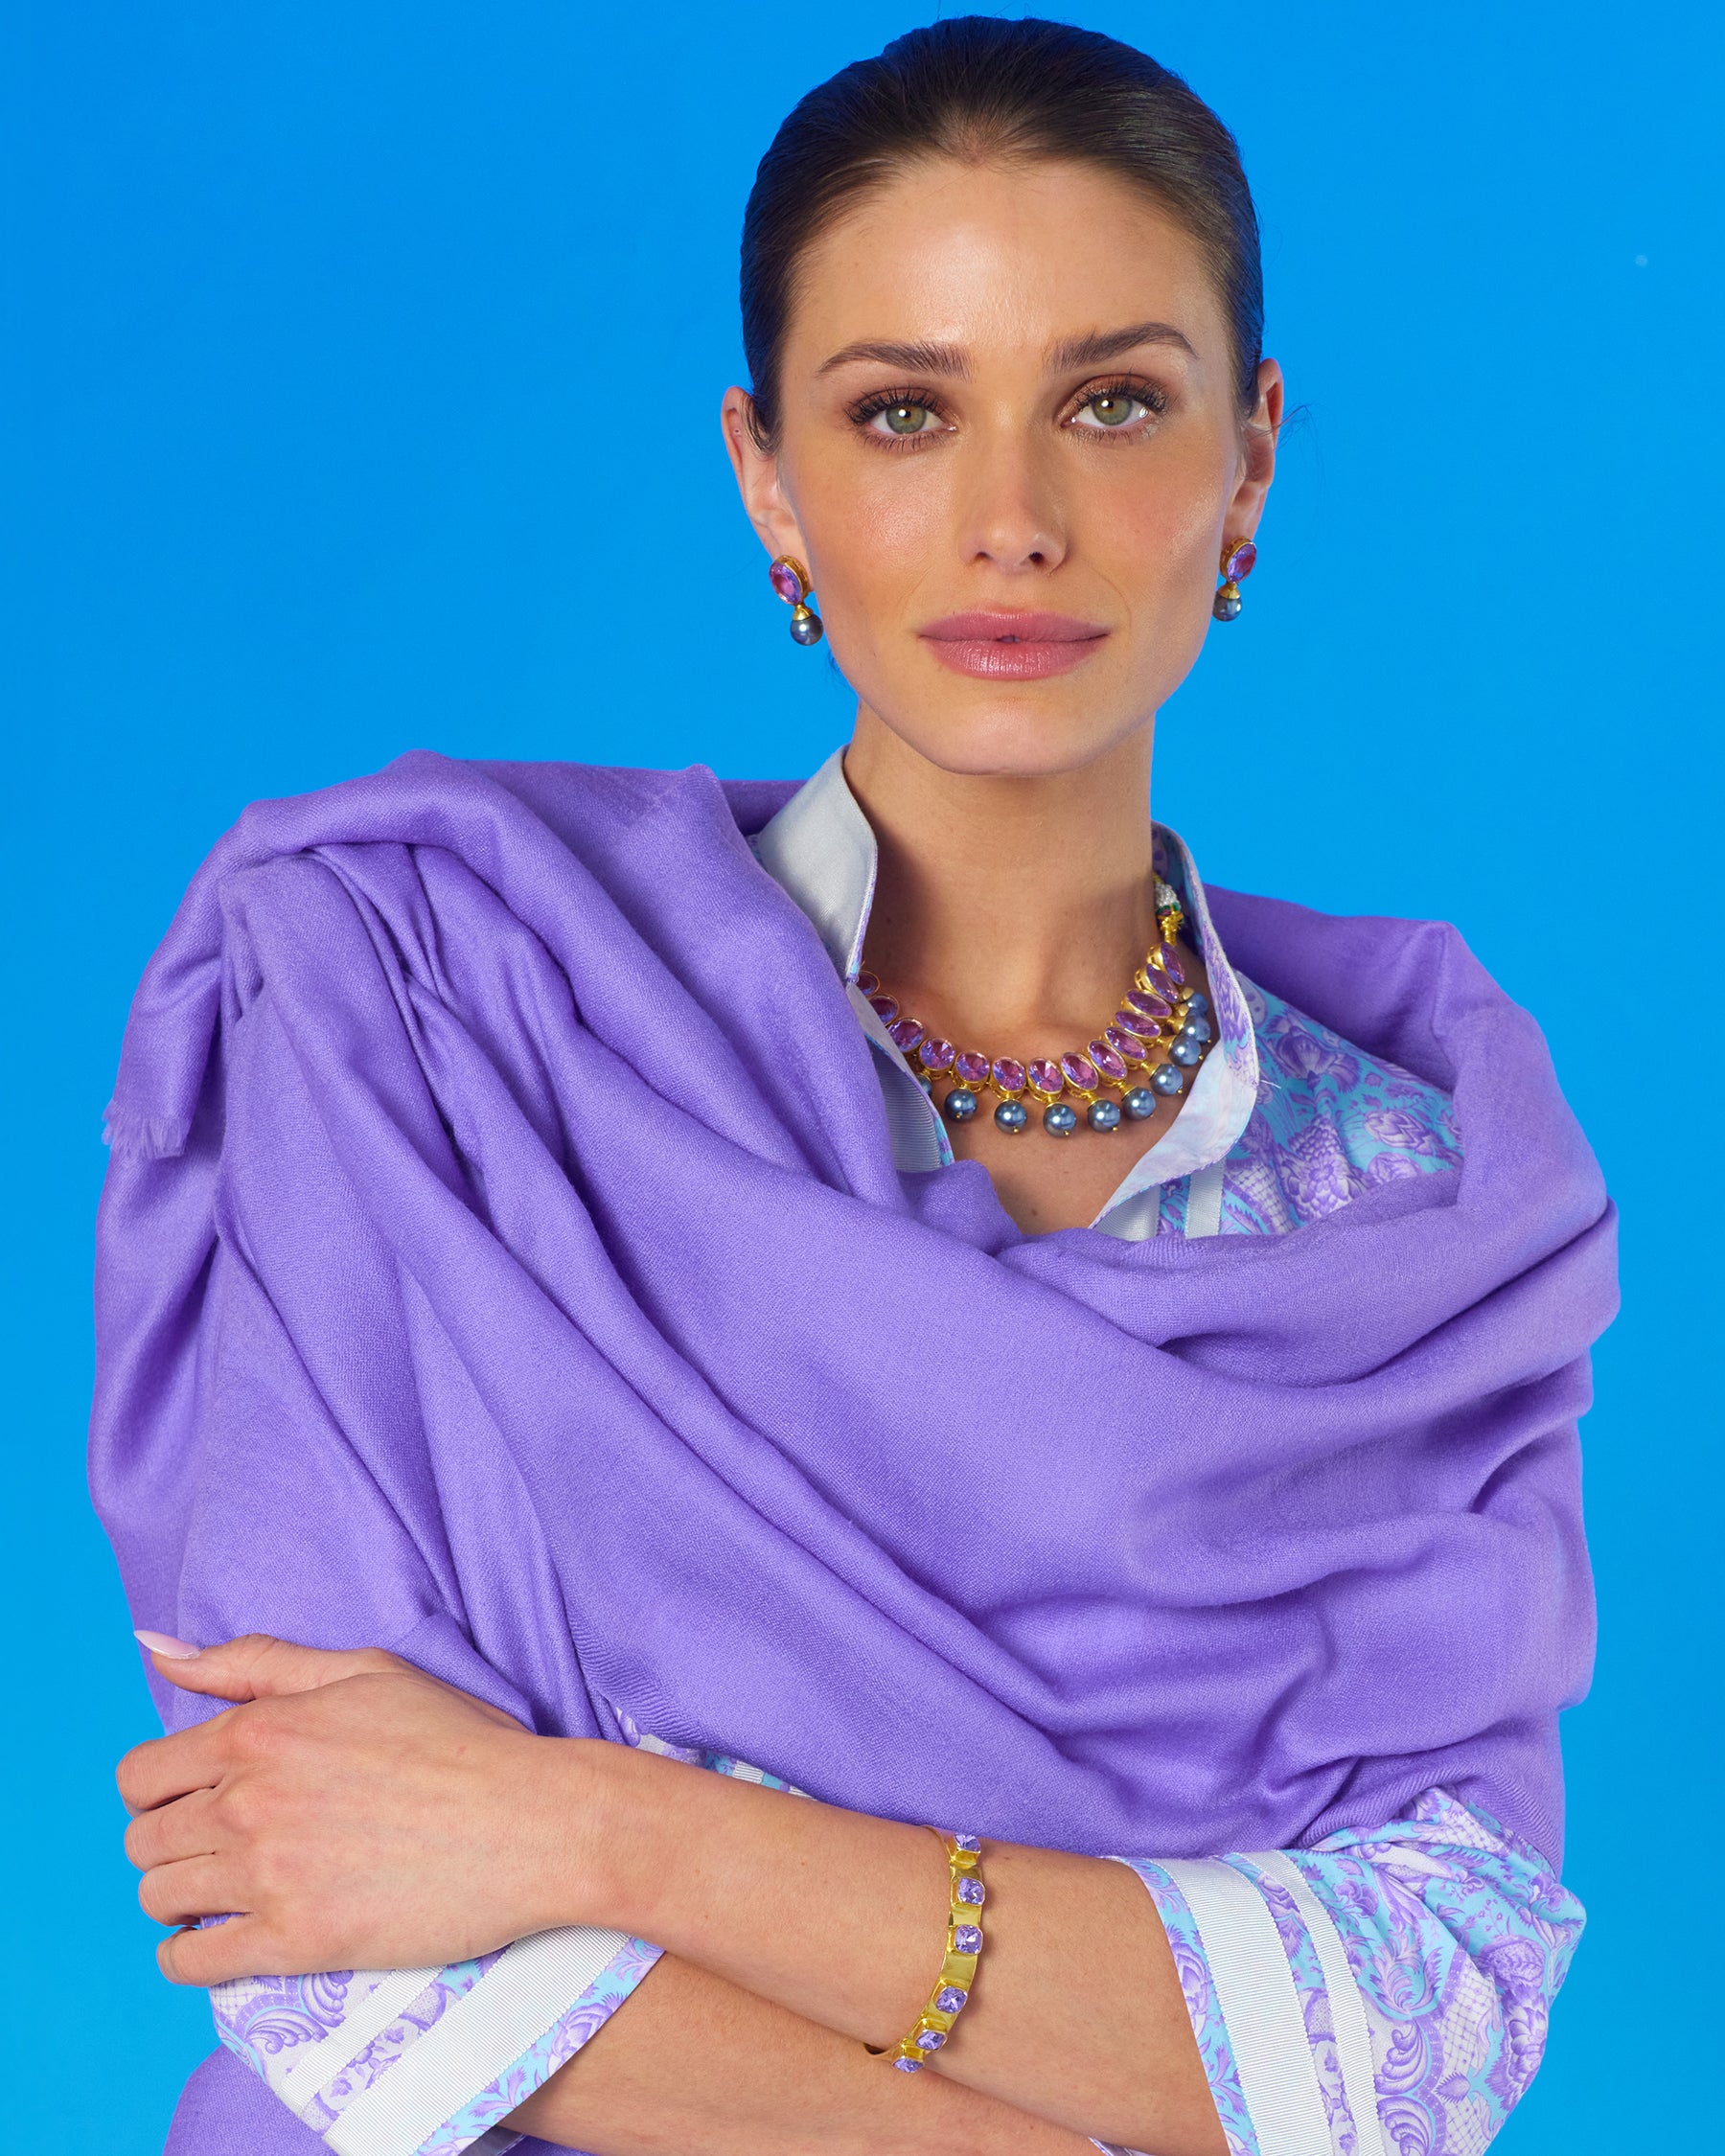 Josephine Pashmina Shawl in Bright Lavender worn with the Capri Long Tunic Dress in Lavender Shalimar